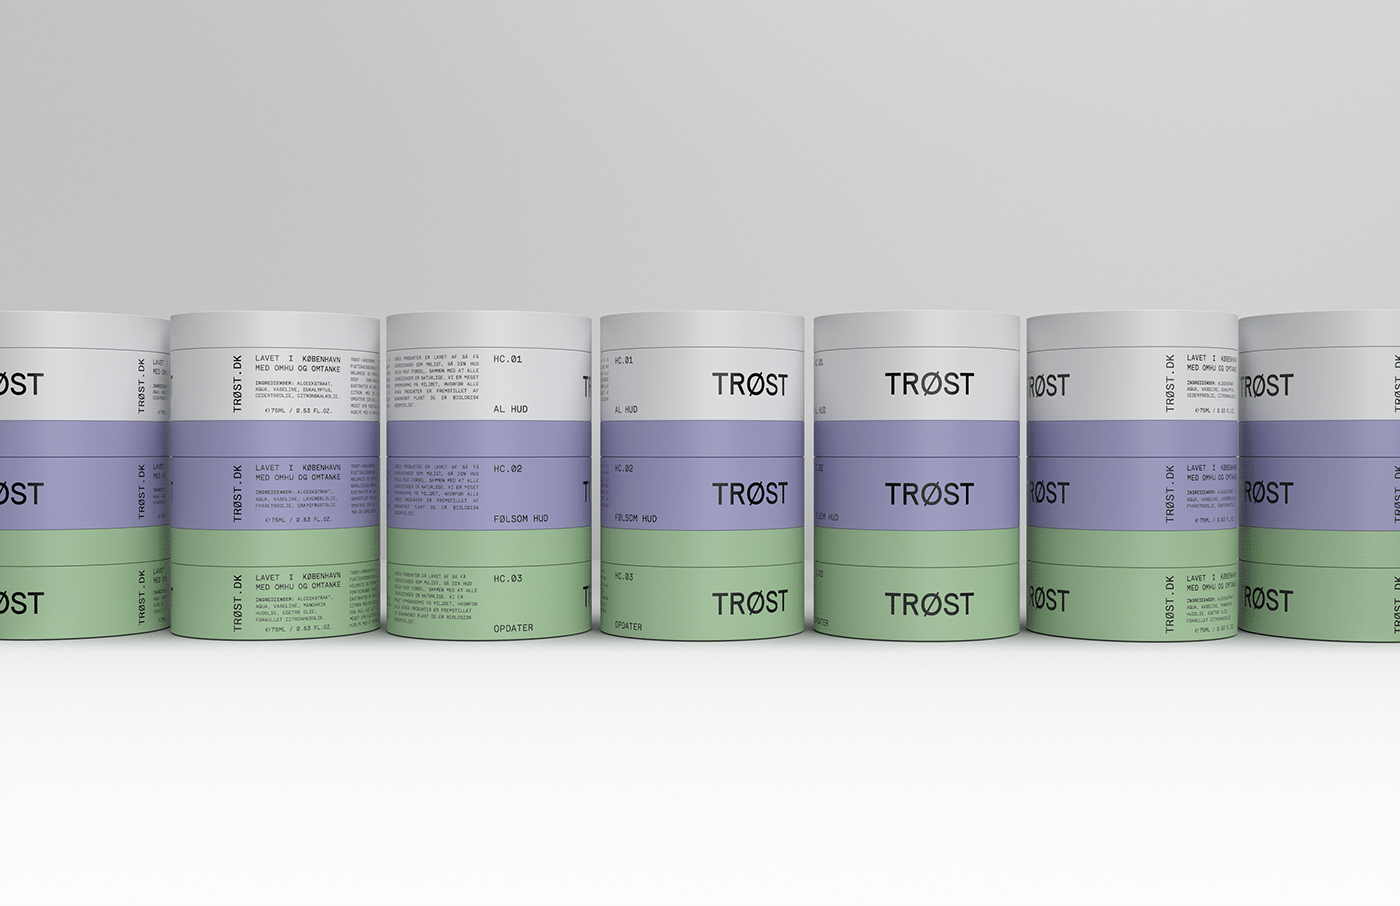 art direction  beauty branding  graphic design  product product design  skincare